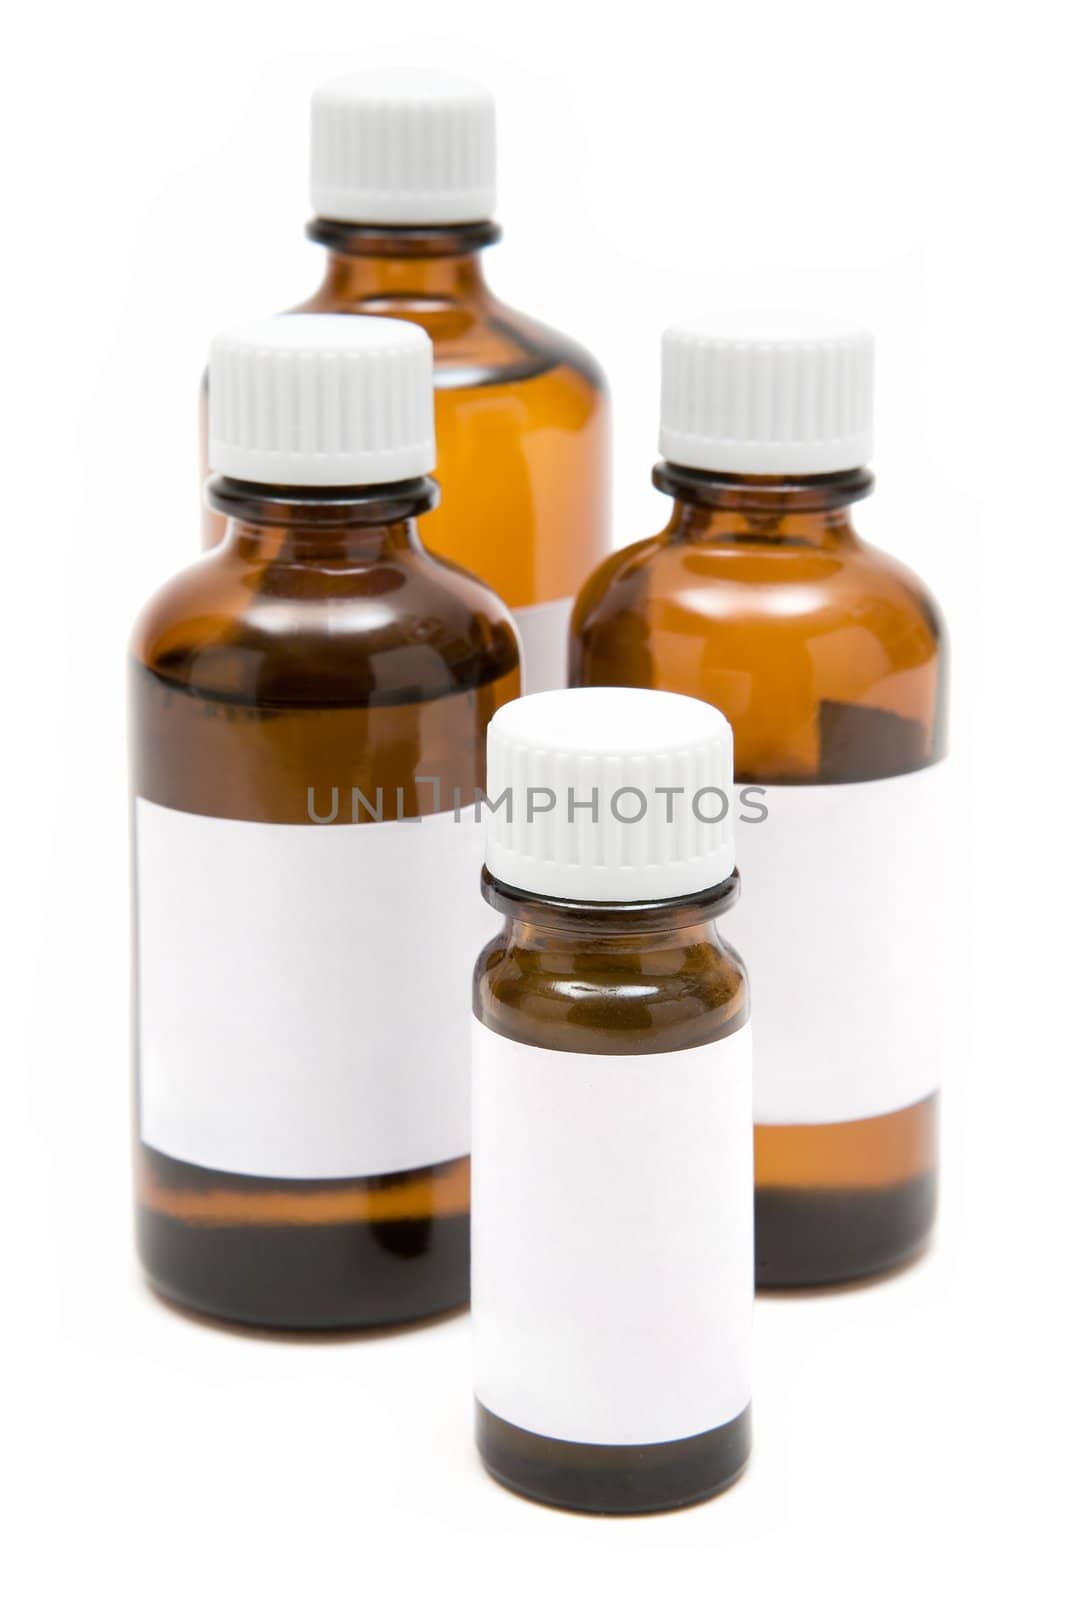 Several medicine bottles with blank labels isolated on a white background.